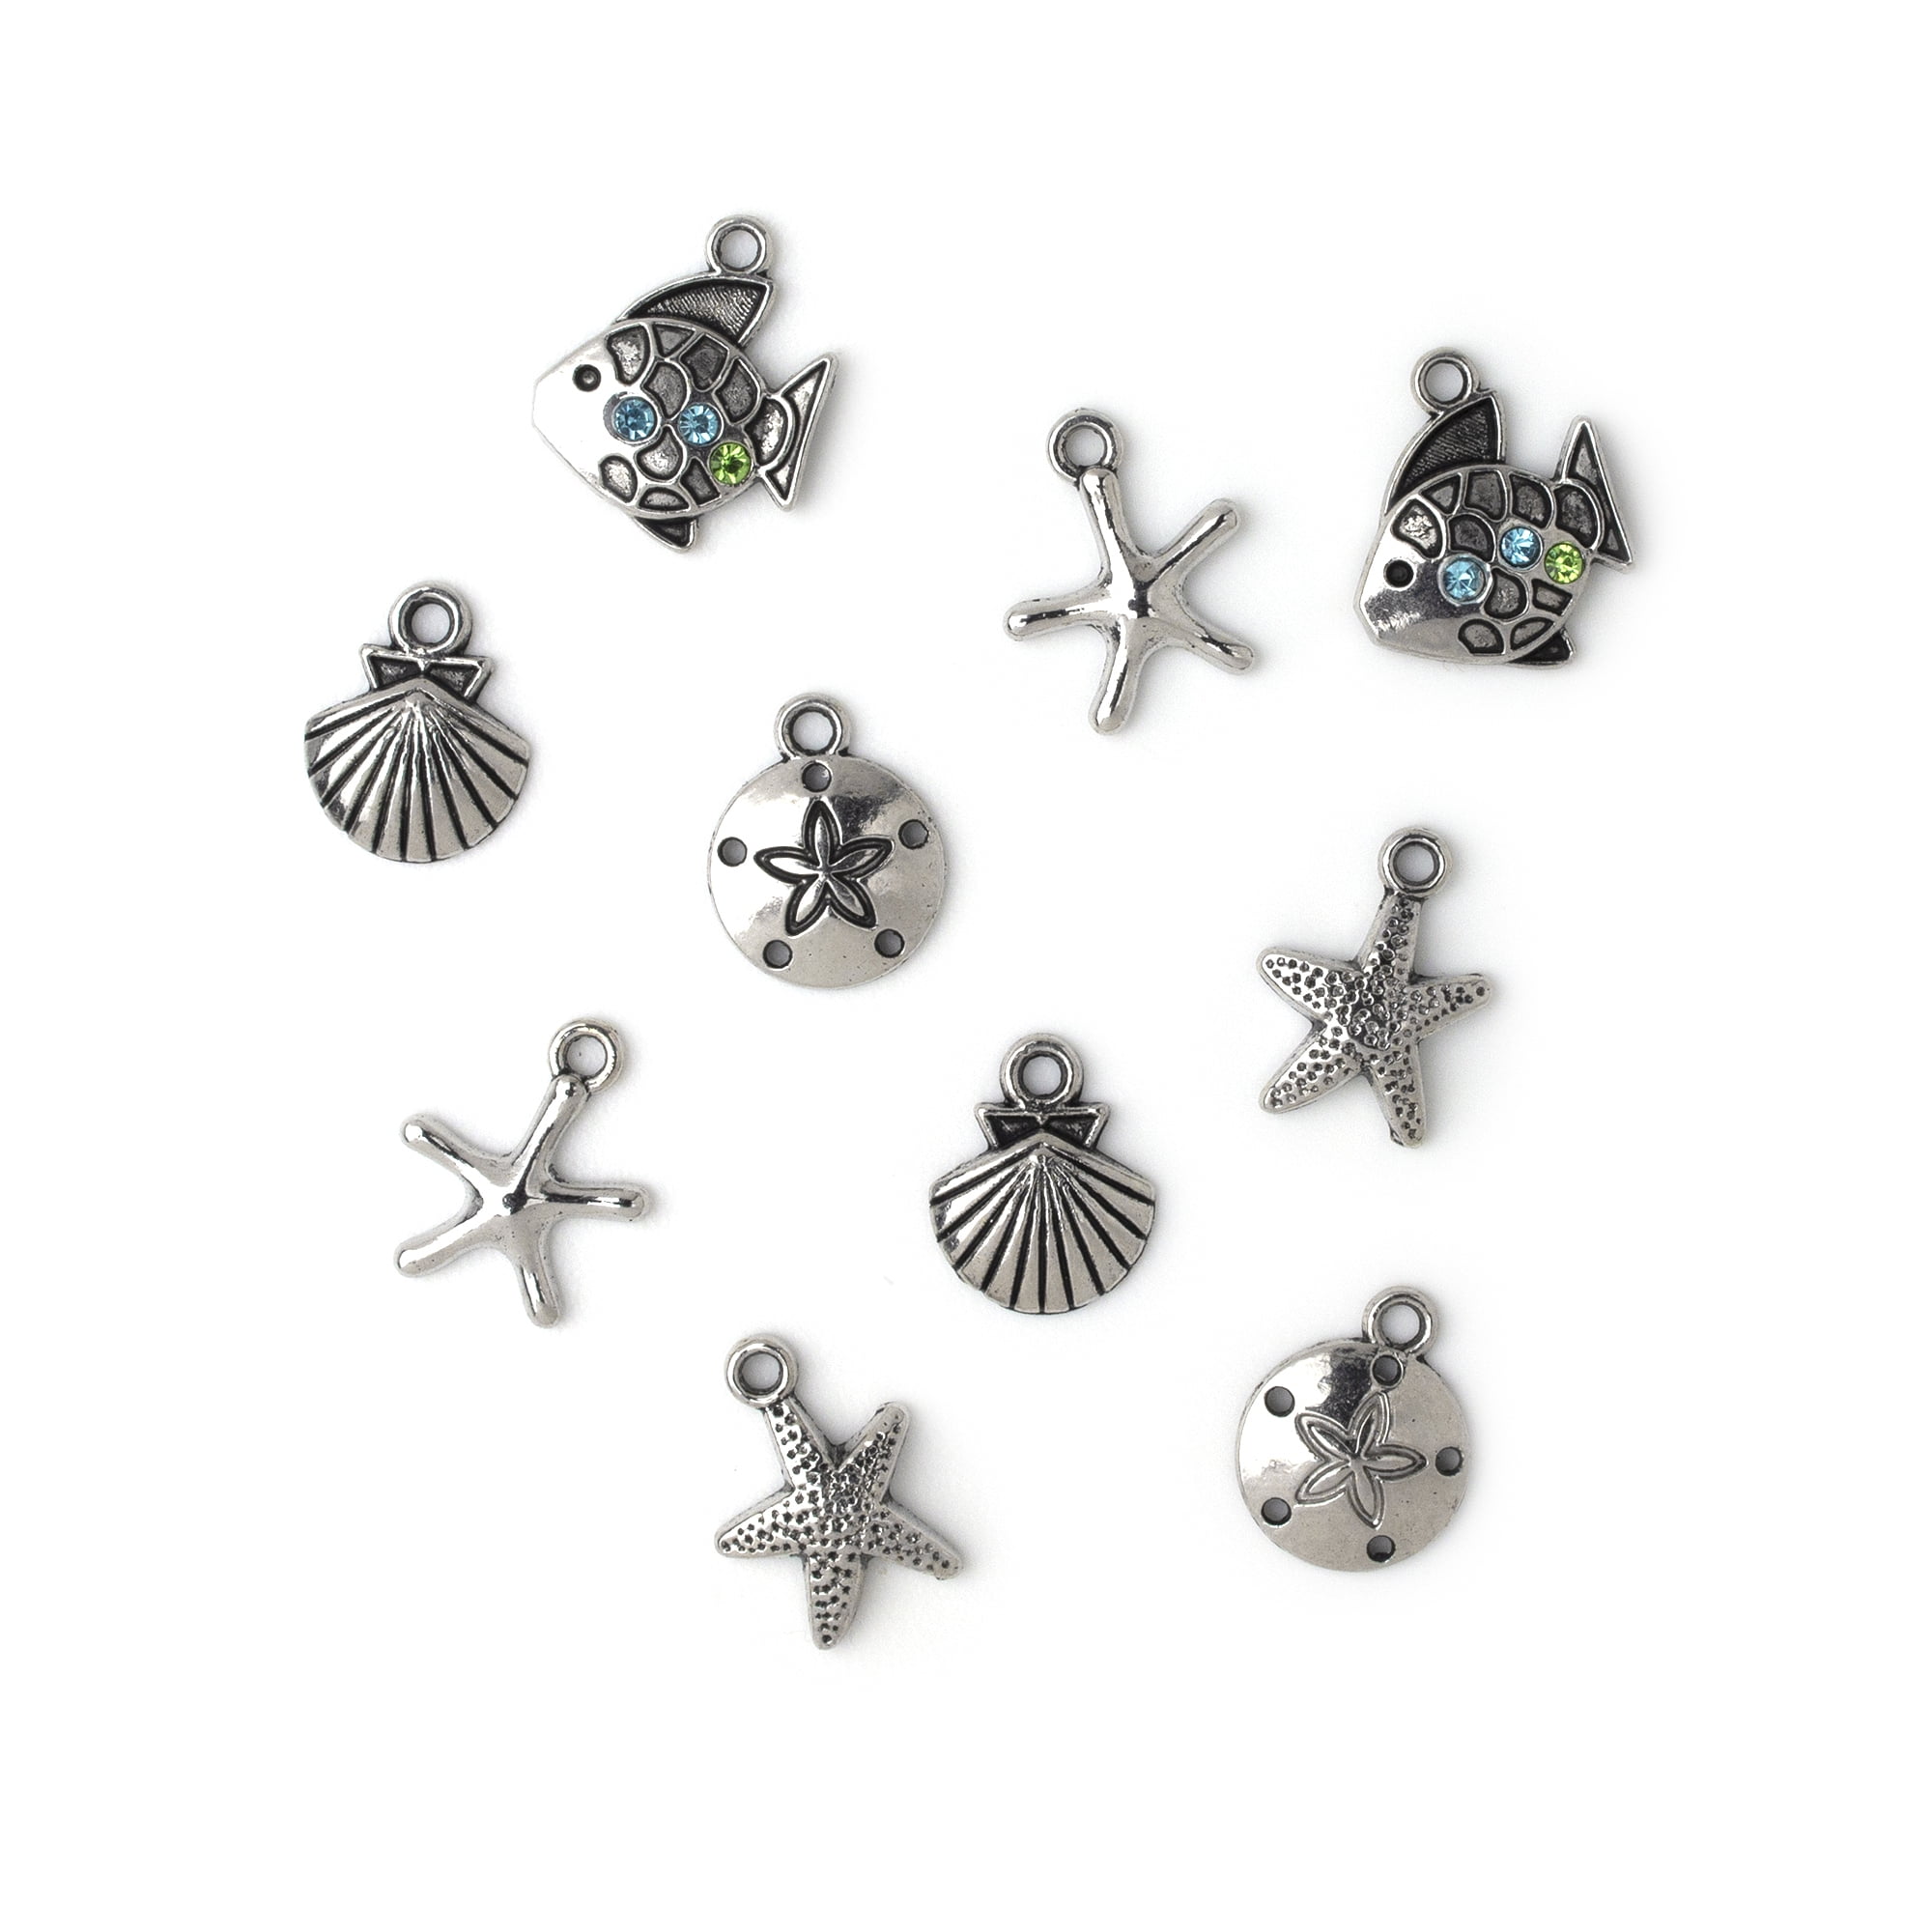 BESTONZON 56pcs Jewelry Making Charms Mixed Smooth Marine Animal Metal  Charms Pendants DIY for Necklace Bracelet Jewelry Making and Crafting  (Antique Bronze) 